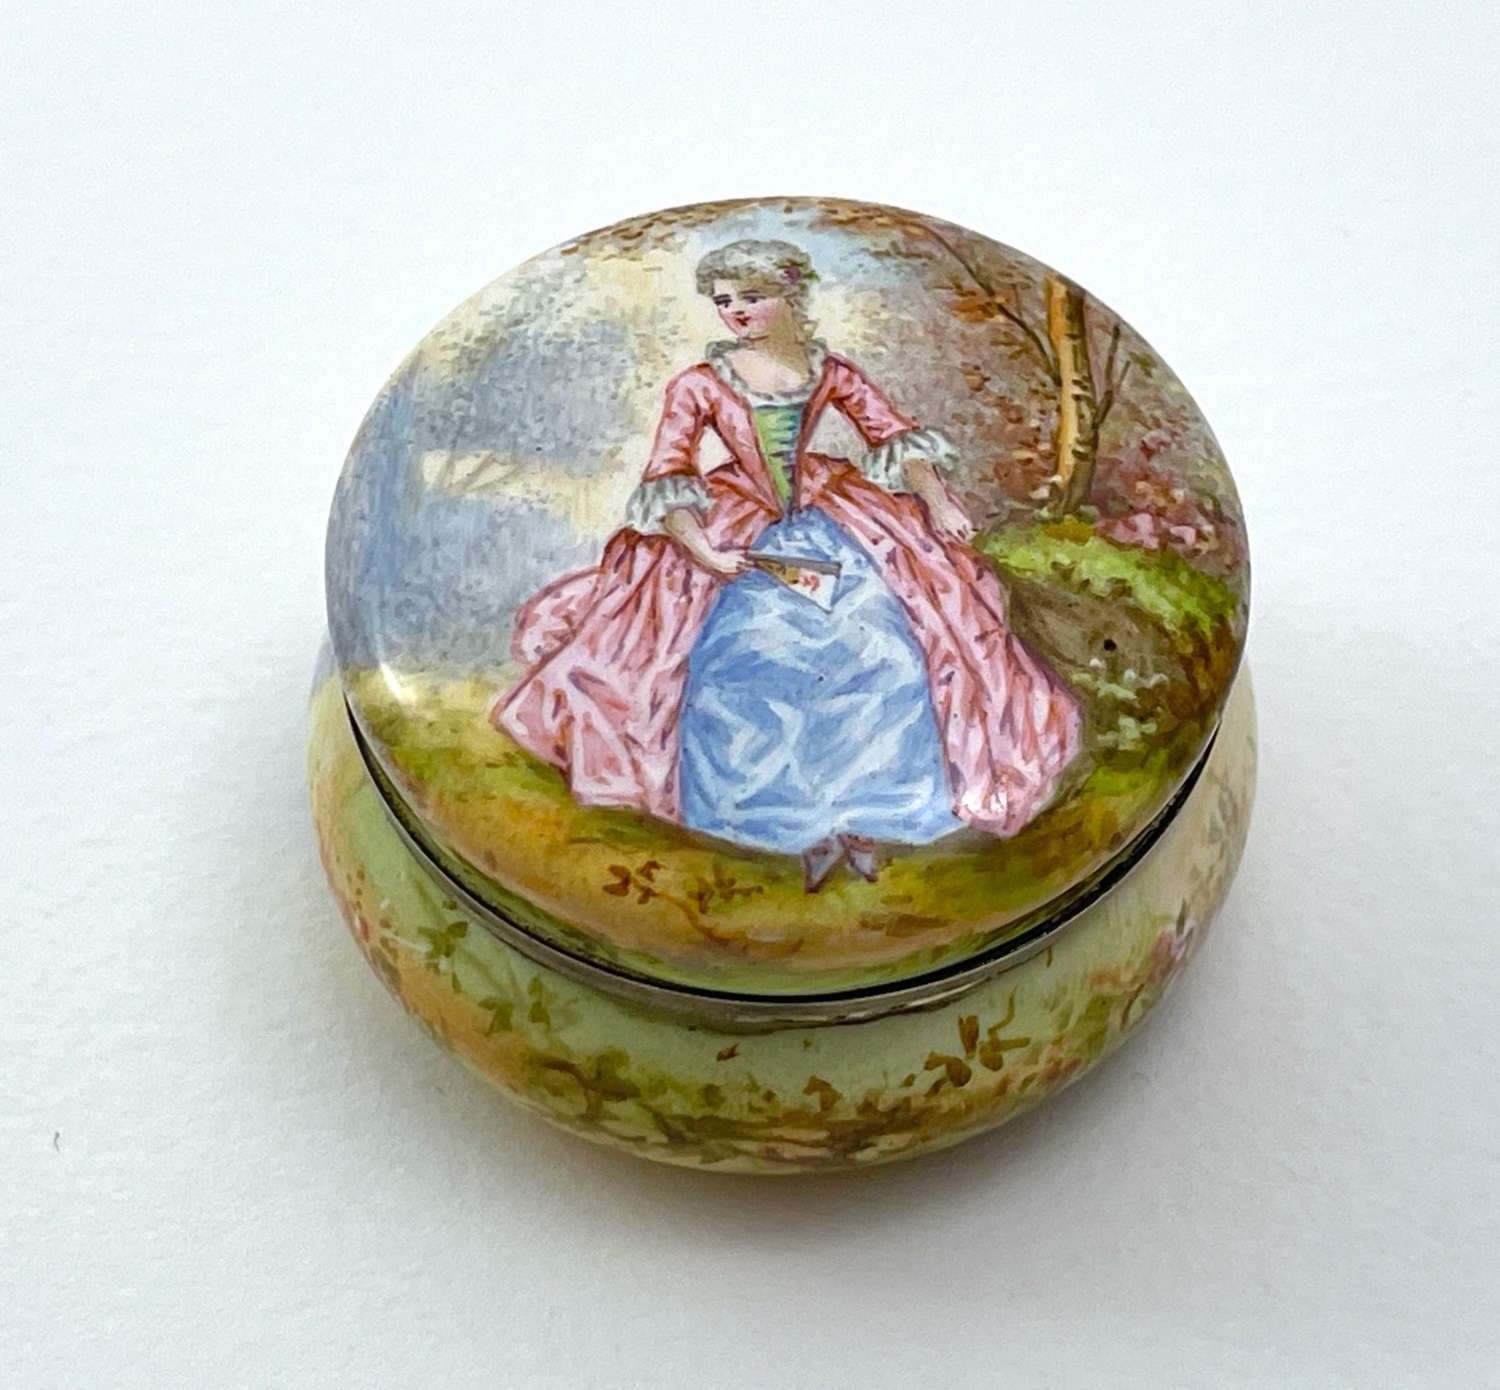 Antique French Enamel Pill Box and Cover with a Lady Holding a Fan